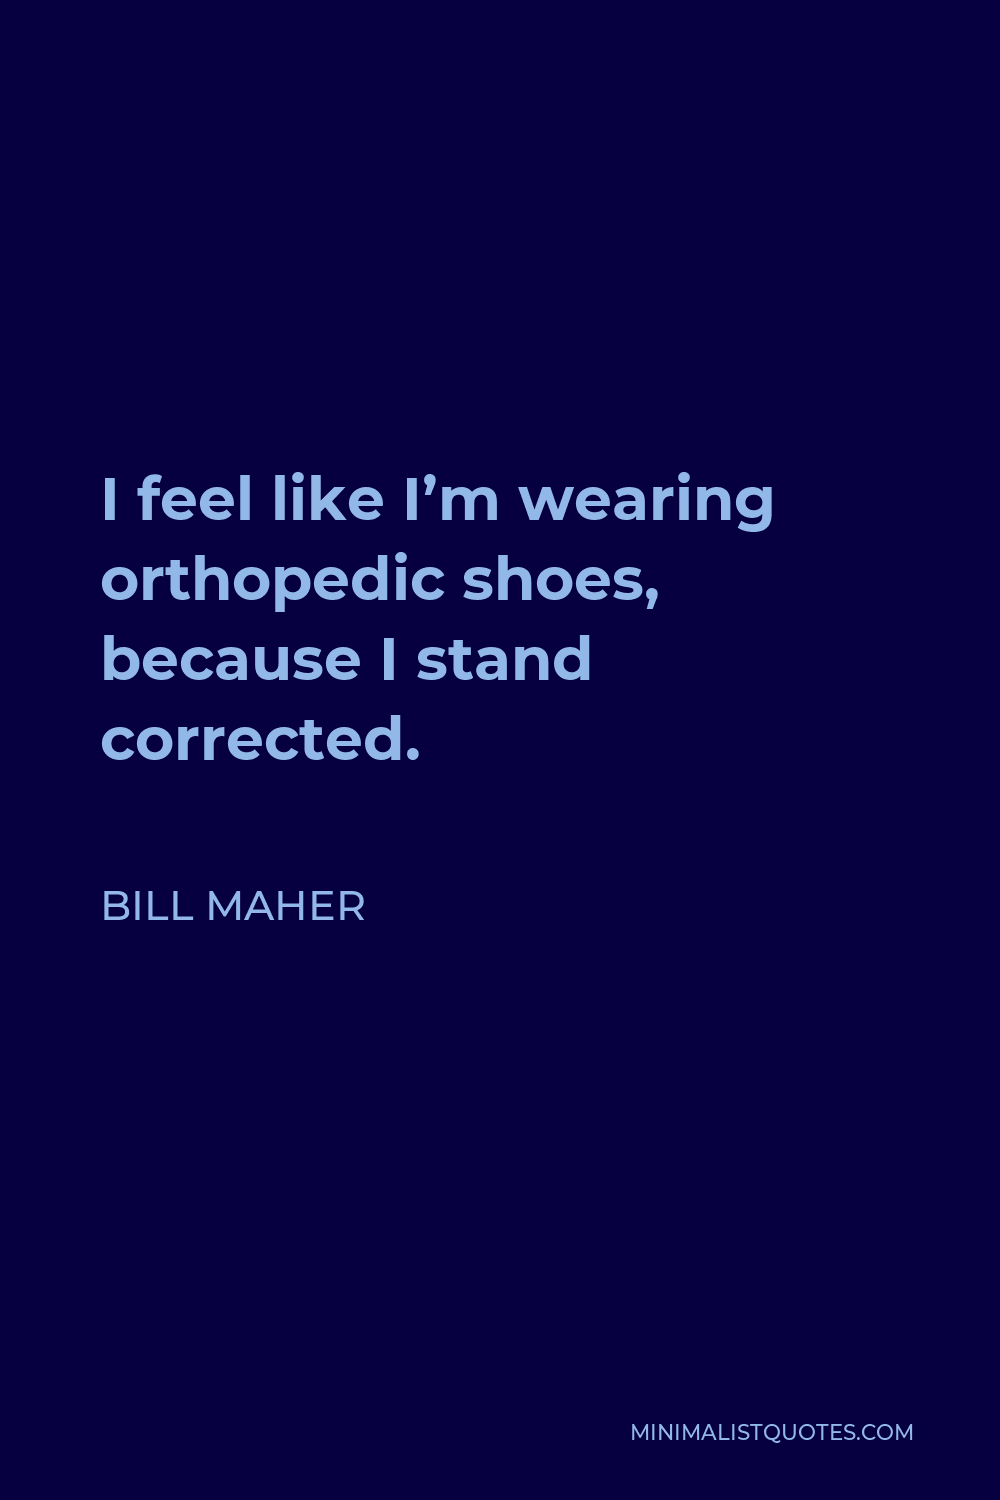 Bill Maher Quote - I feel like I’m wearing orthopedic shoes, because I stand corrected.